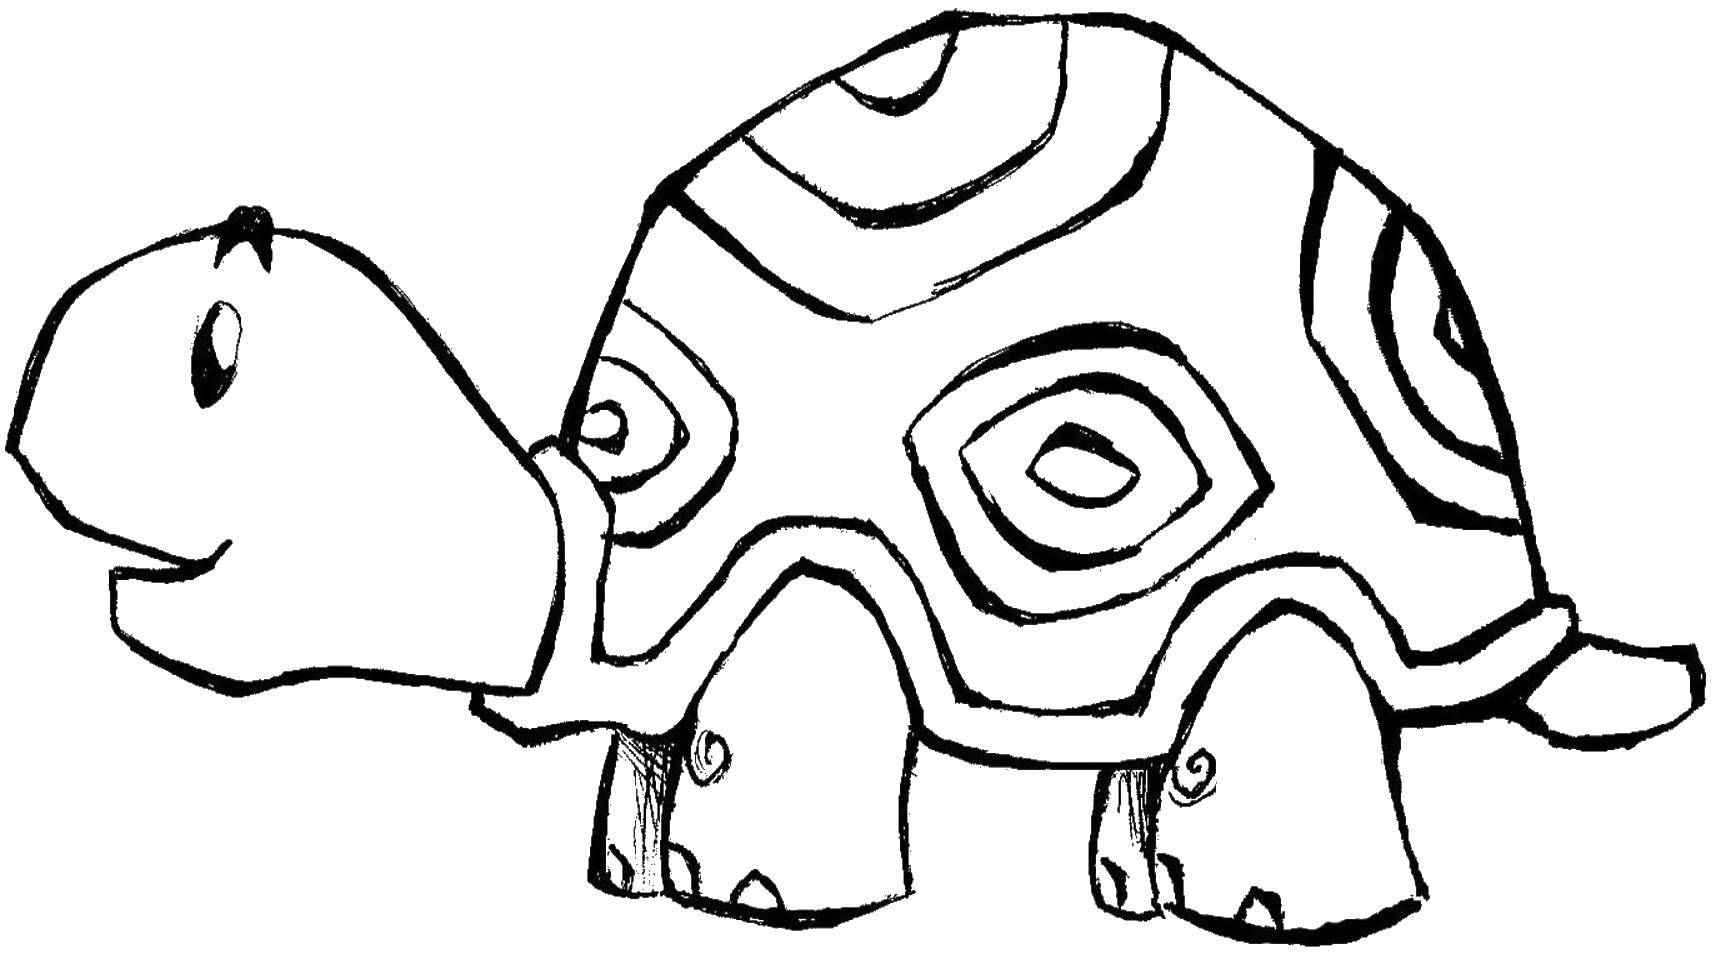 Coloring Pokemon bug. Category toy. Tags:  Toy, turtle.